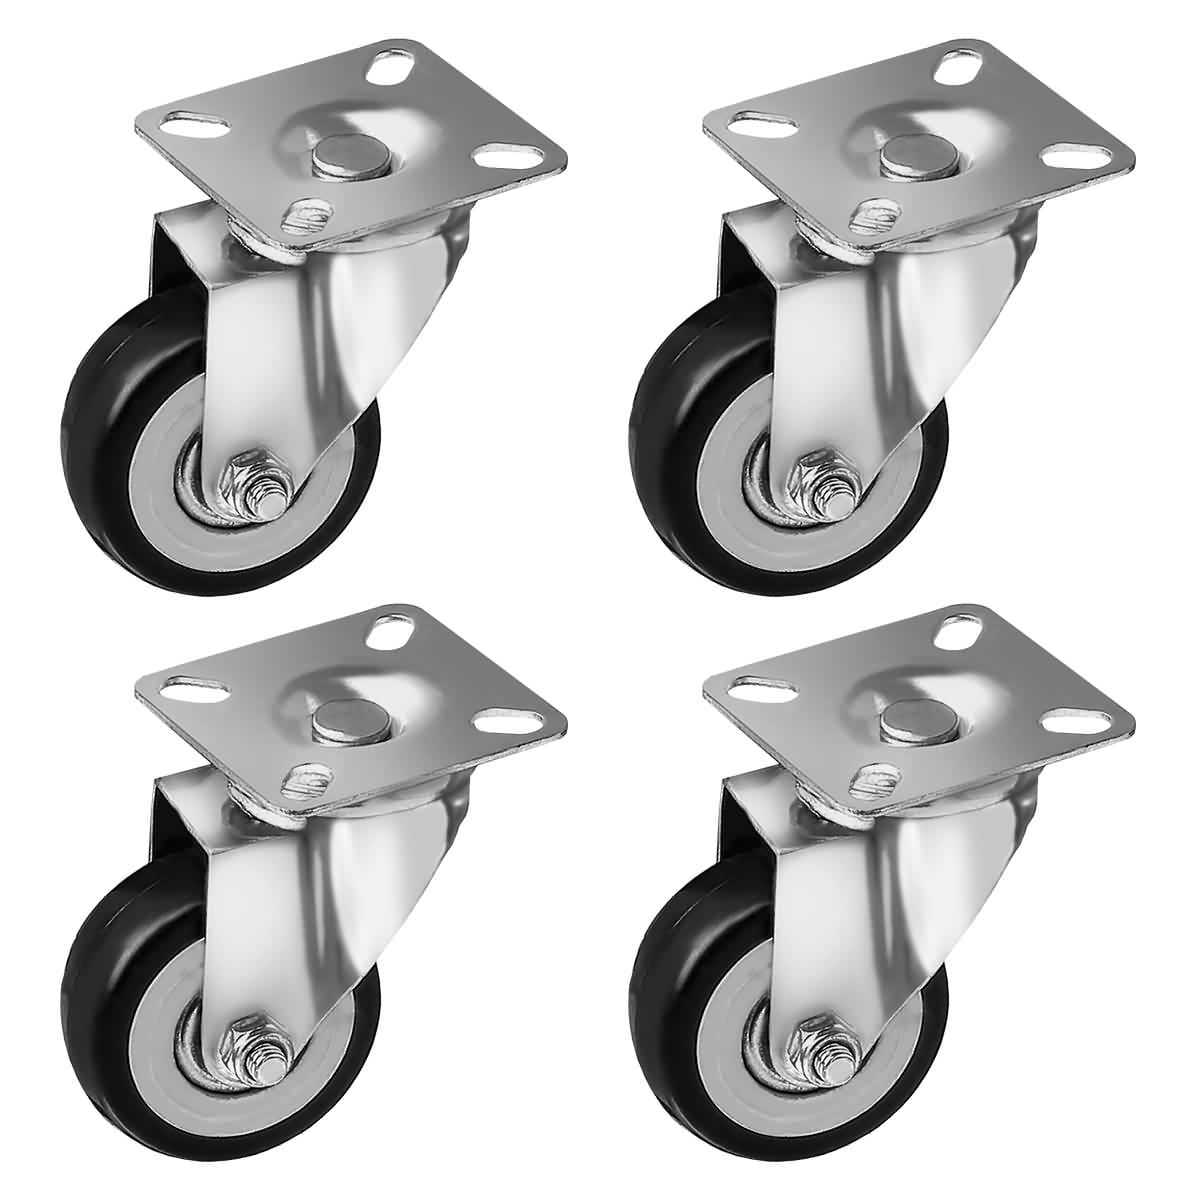 50mm rubber castors set of 2 braked and 2 swivel casters 